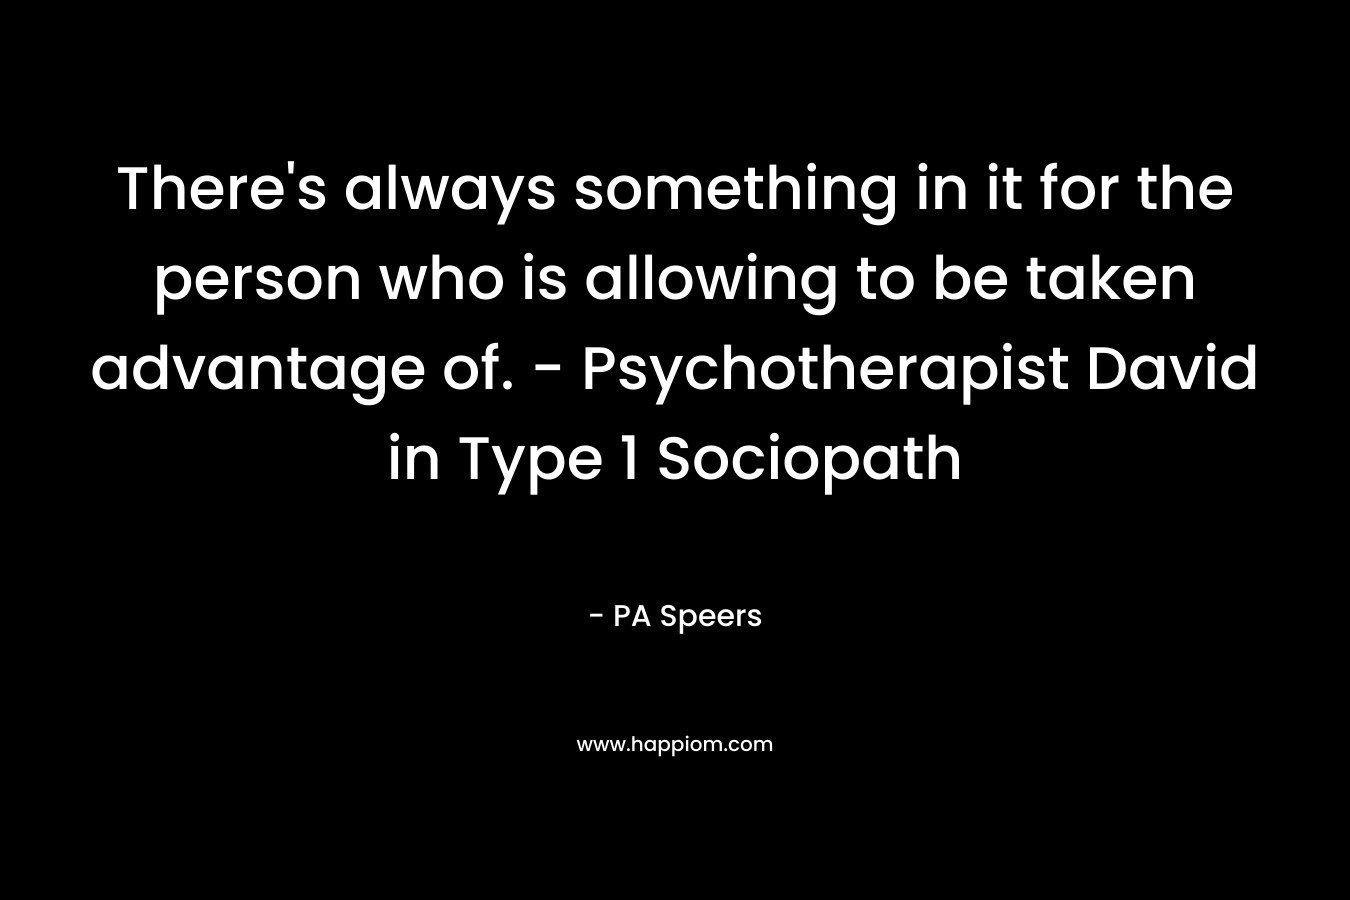 There’s always something in it for the person who is allowing to be taken advantage of. – Psychotherapist David in Type 1 Sociopath – PA Speers